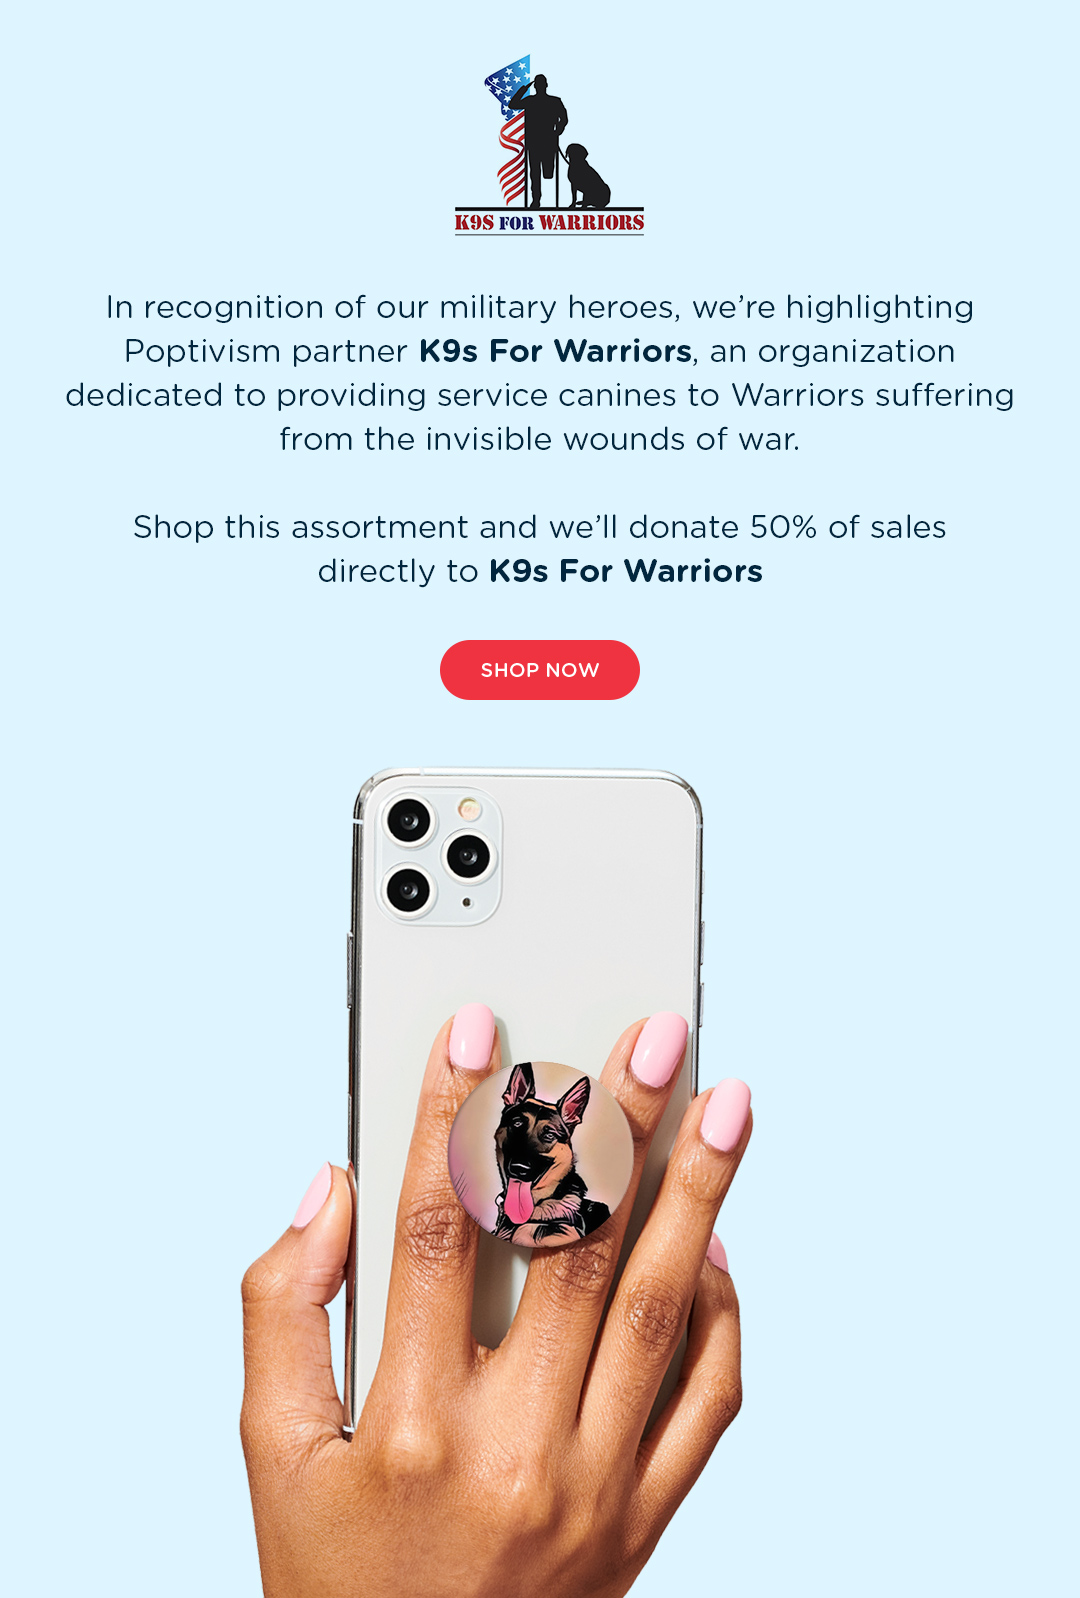 In Recognition of our military heroes, we''re highlighting Poptivism Partner K9s For Warriors, an organization dedicated to providing service canines to Warriors suffering from the invisible wounds of war. Shop the assortment and we''ll donate 50% of sales directly to K9s For Warriors